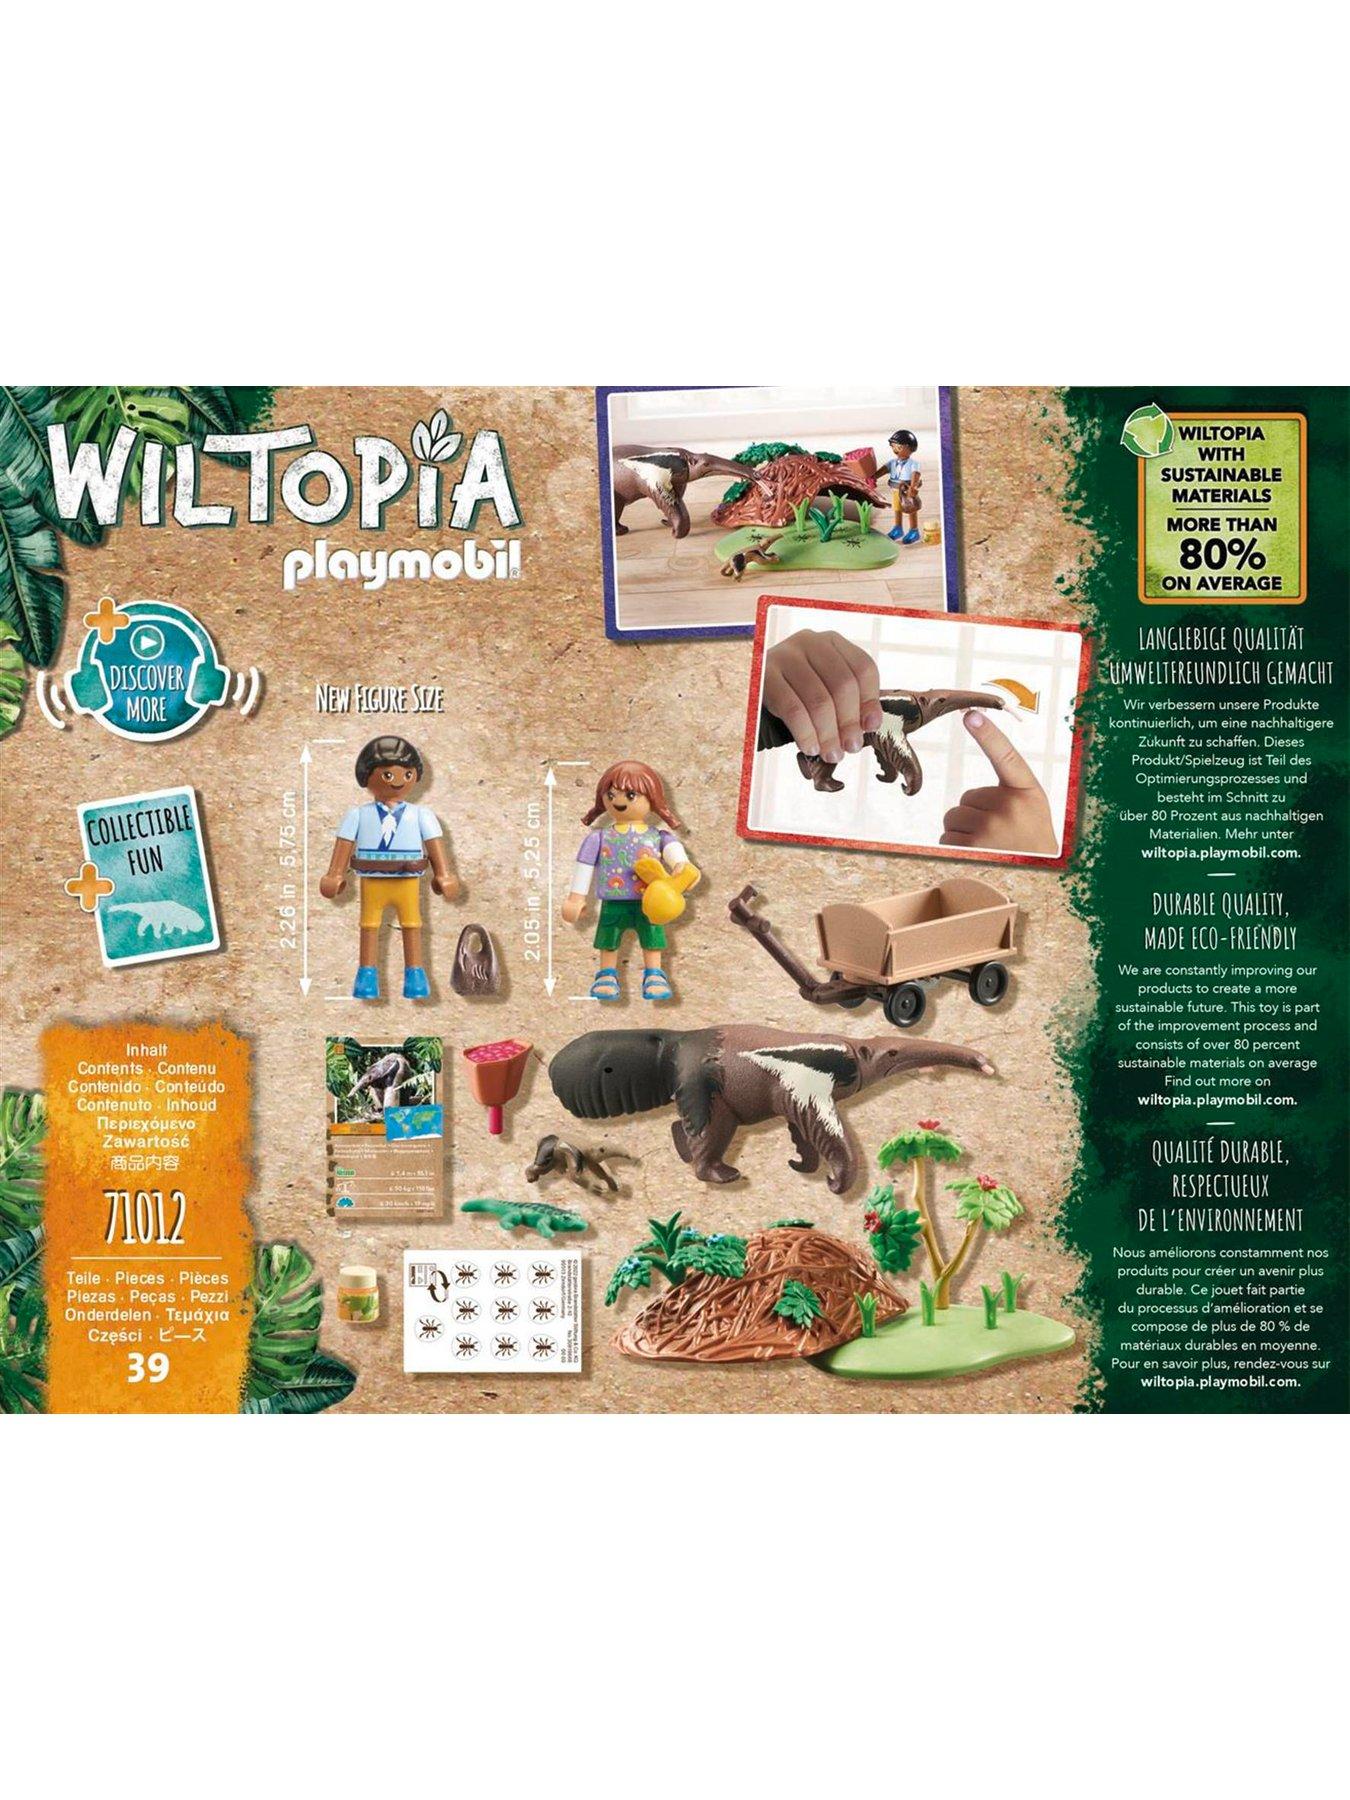 PLAYMOBIL – Wiltopia toys made from old refrigerators